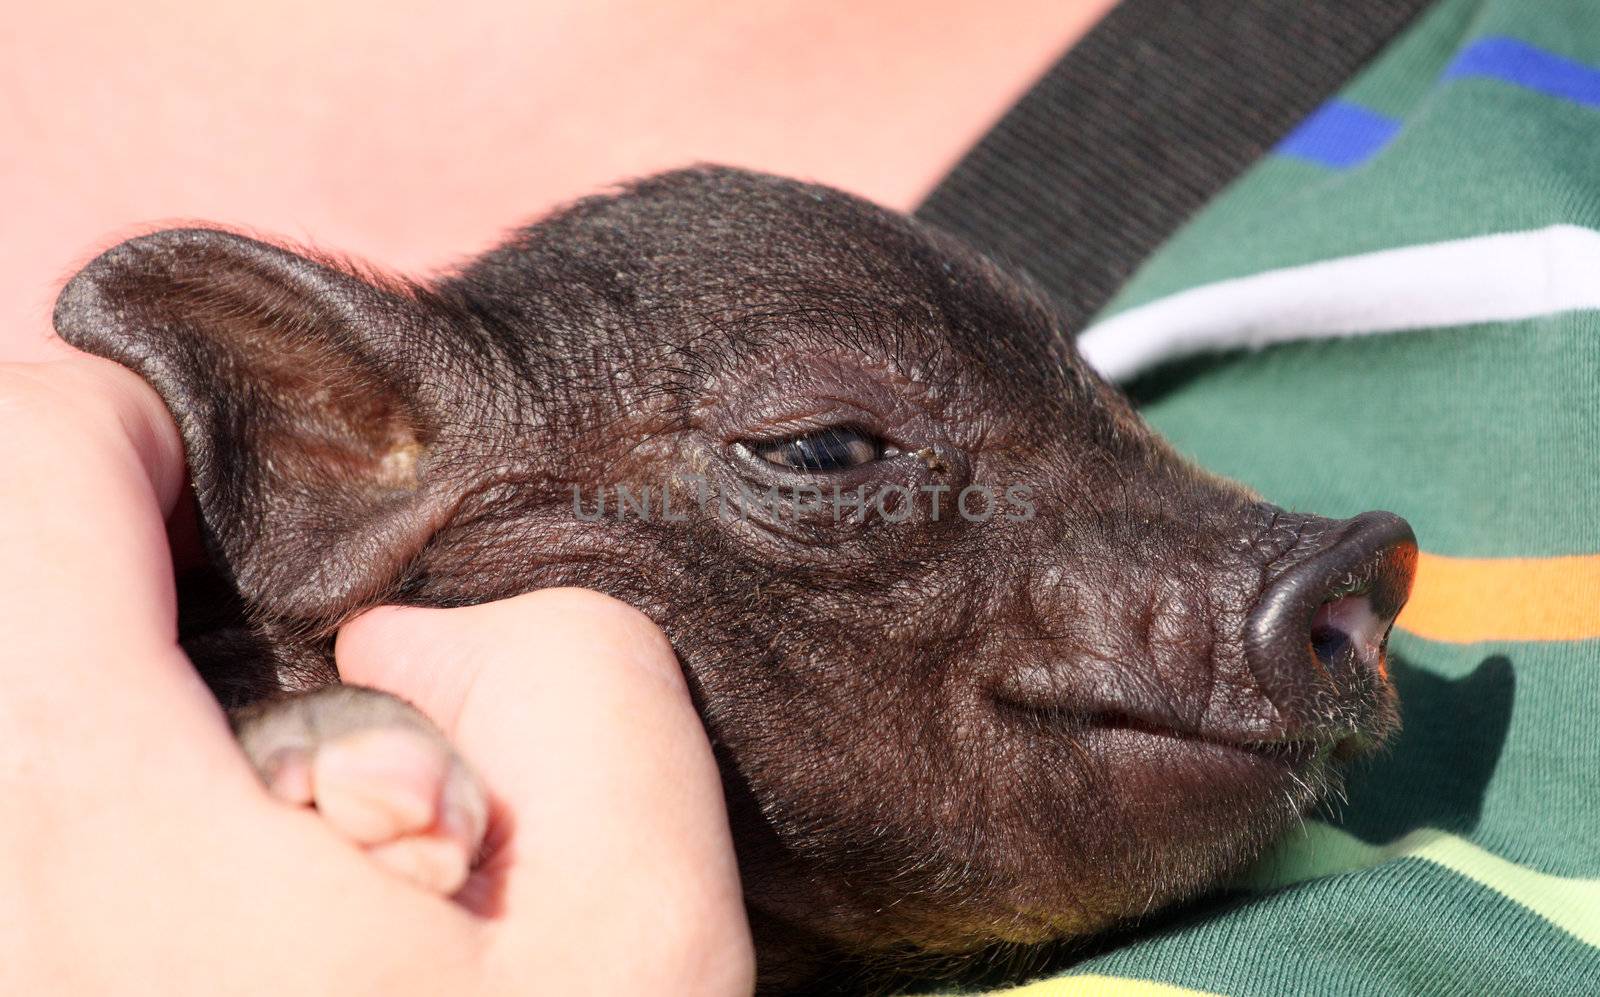 Small pig on hands at the girl by fedlog